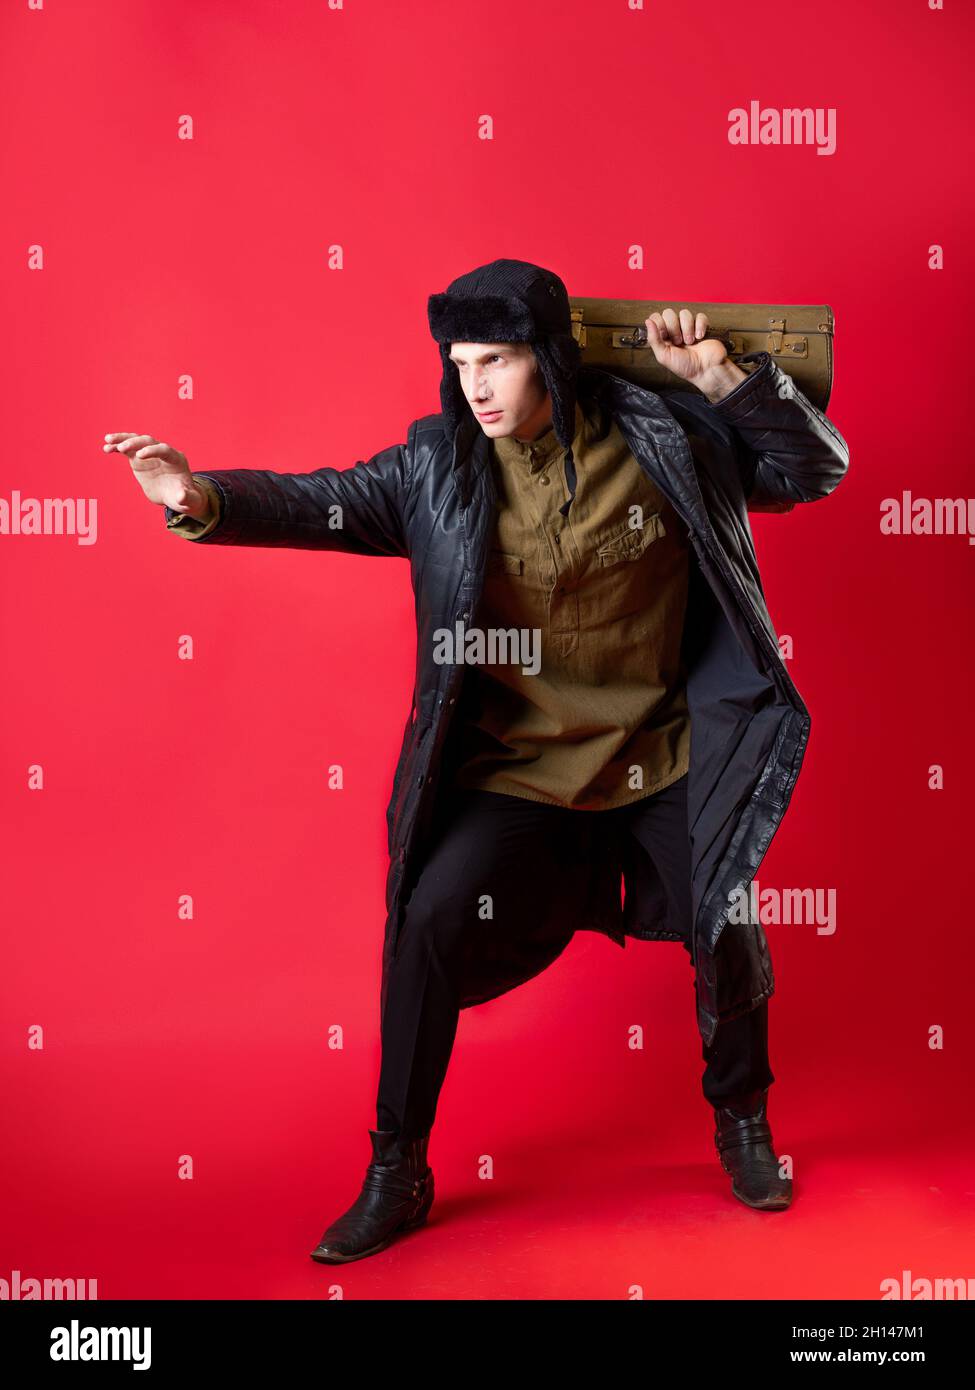 A man in old-fashioned clothes and a hat with earflaps he drags his big suitcase on himself, Russian post-war style. Portrait on a red background Stock Photo